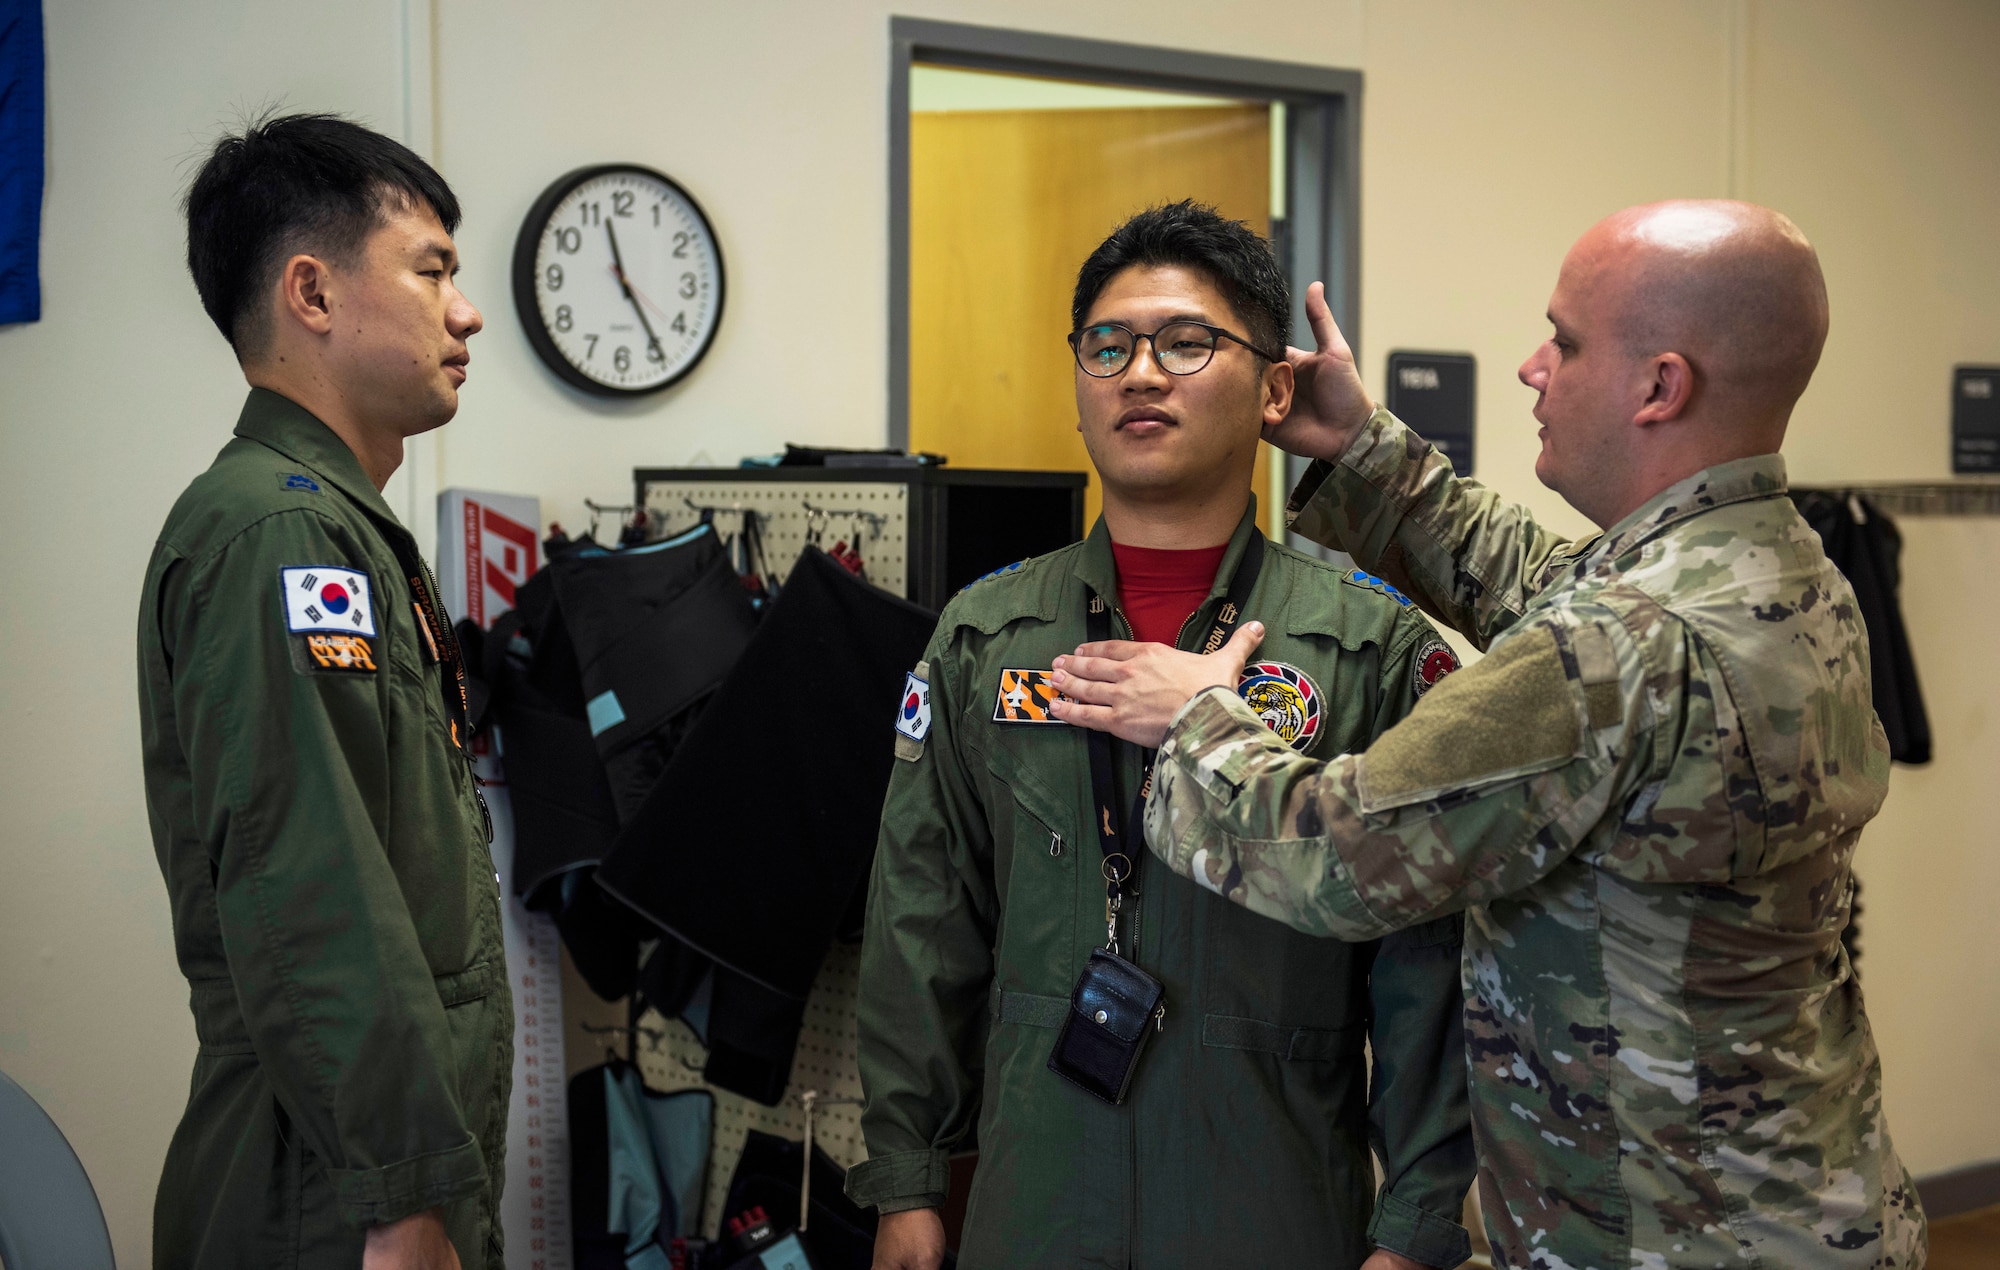 U.S. Air Force Tech. Sgt. Nicholas Ramirez, 8th Medical Operations Squadron physical therapy flight chief, teaches pilots from Republic of Korea Air Force’s 111th Fighter Squadron how to adjust their posture during a training session at Kunsan Air Base, Republic of Korea, Aug. 9, 2019. Pilots often suffer from neck and back pain from flying for prolonged hours wearing their equipment. (U.S. Air Force photo by Senior Airman Stefan Alvarez)